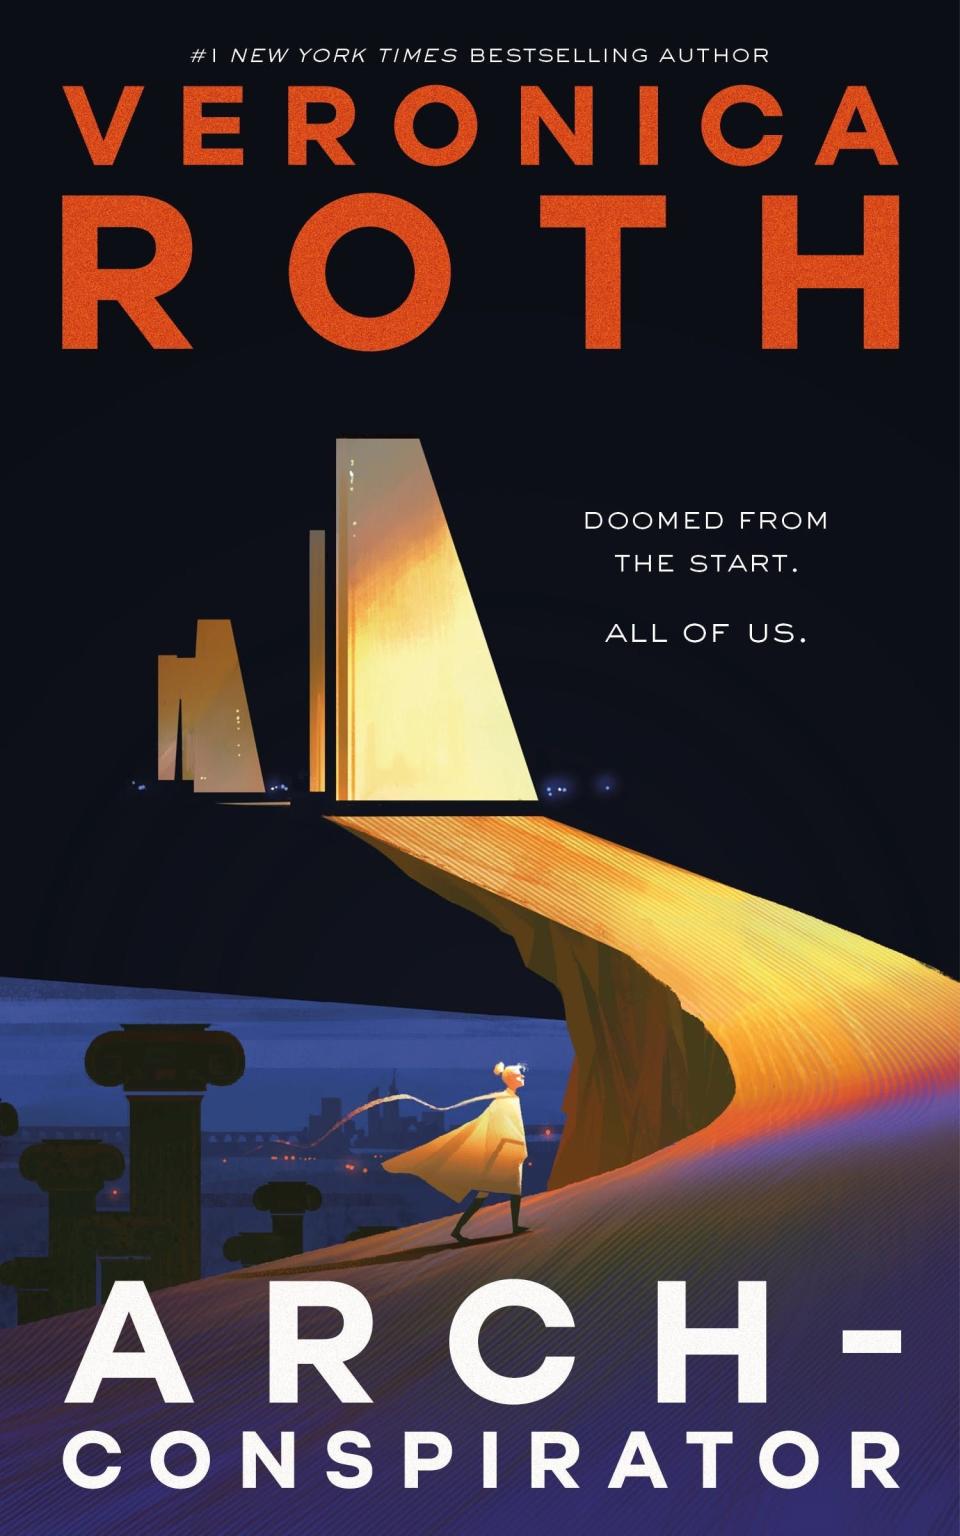 'Arch-Conspirator' by Veronica Roth